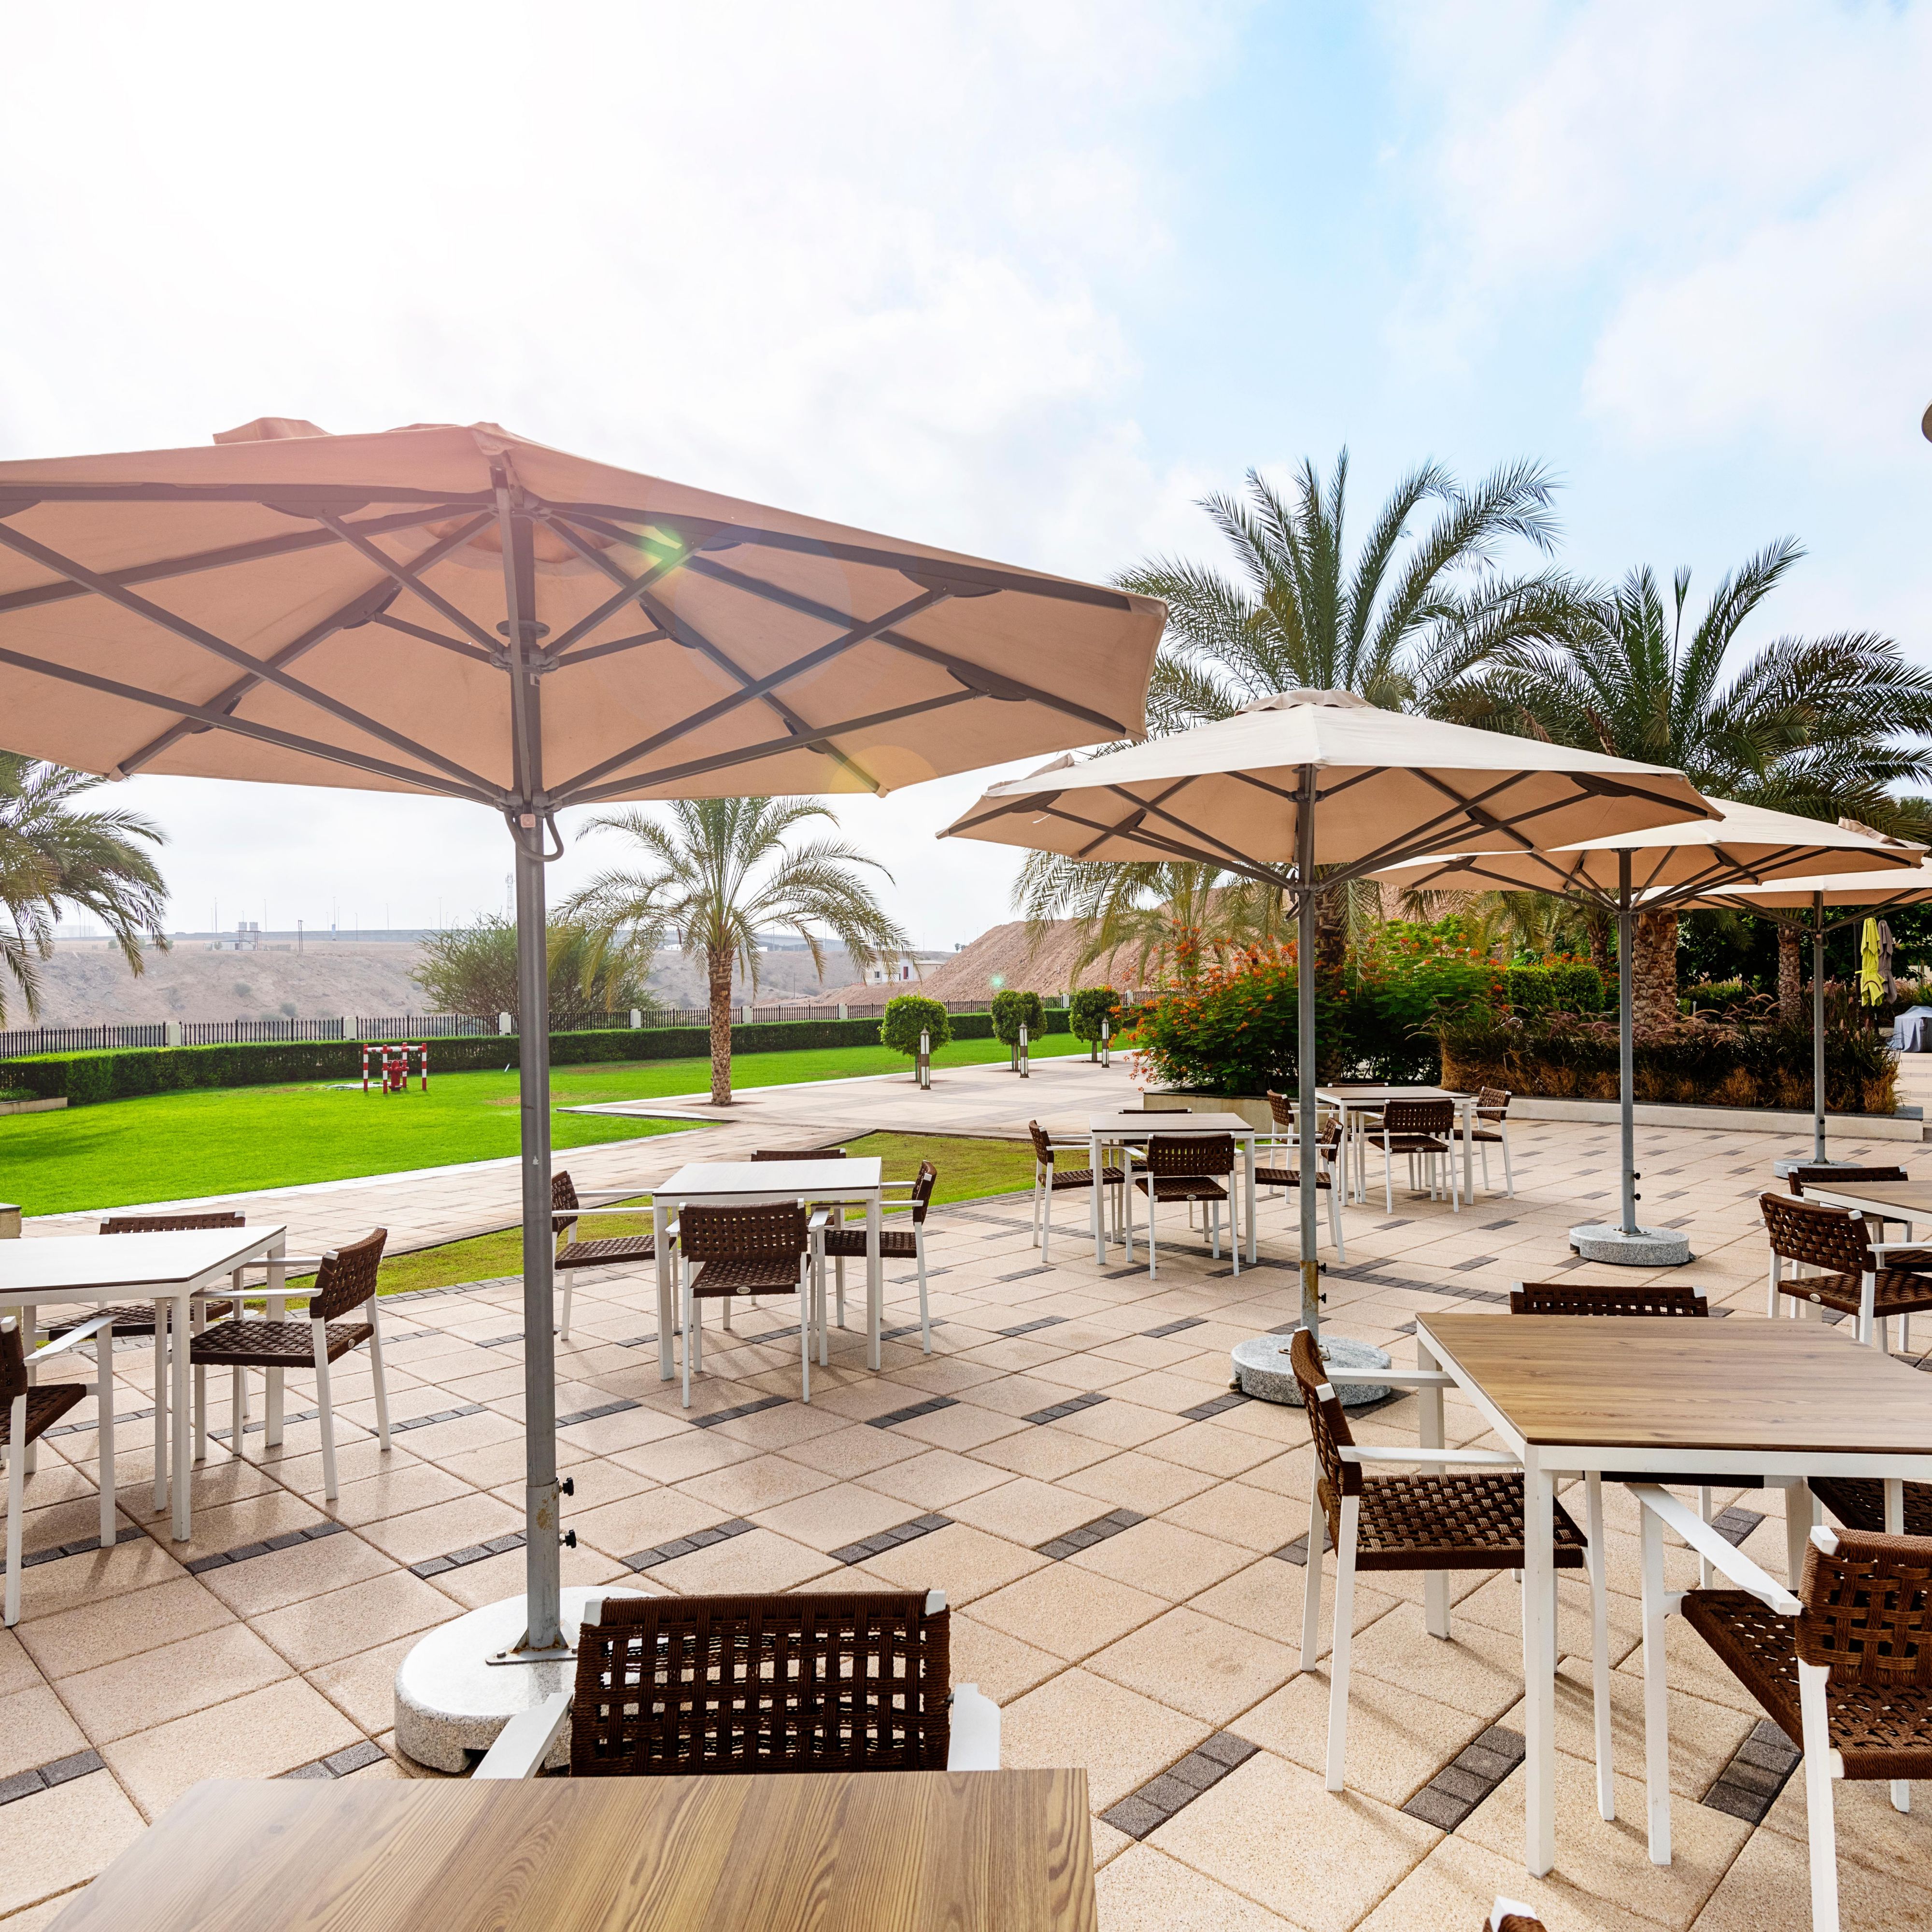 Enjoy your meal at Mosaic´s terrace